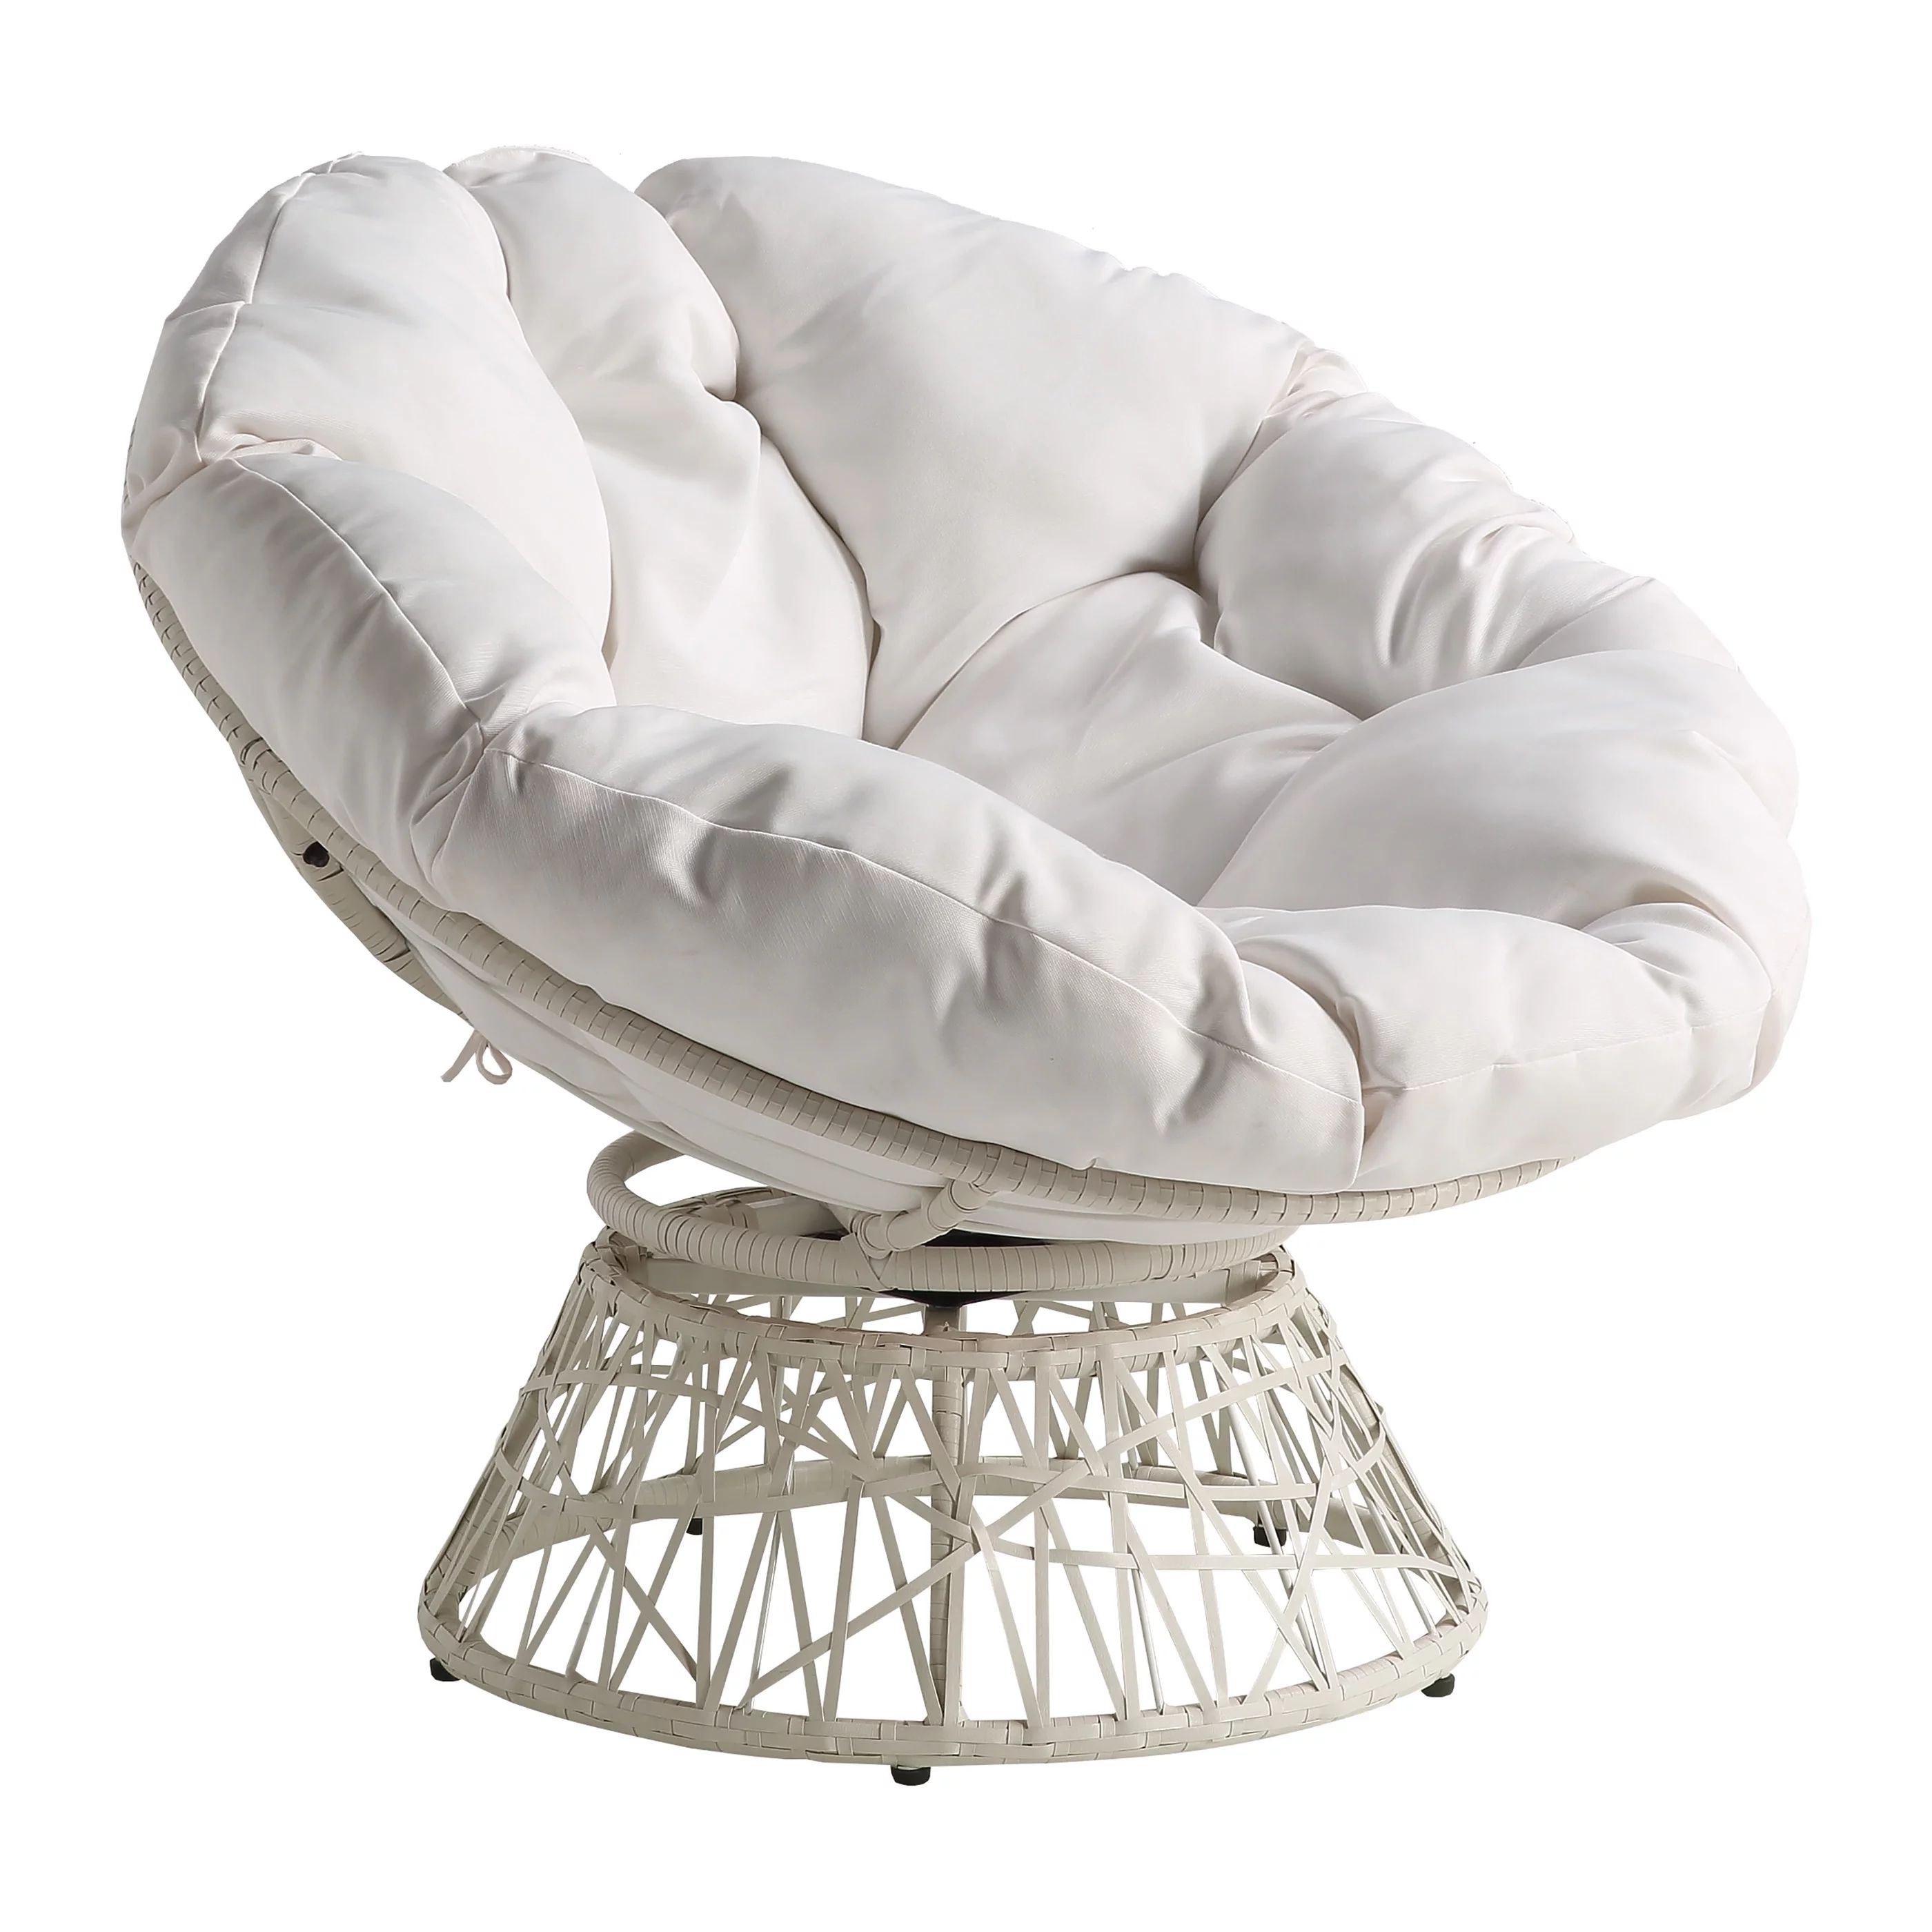 OSP Home Furnishings Papasan Chair with White Round Pillow Cushion and White Wicker Weave | Walmart (US)